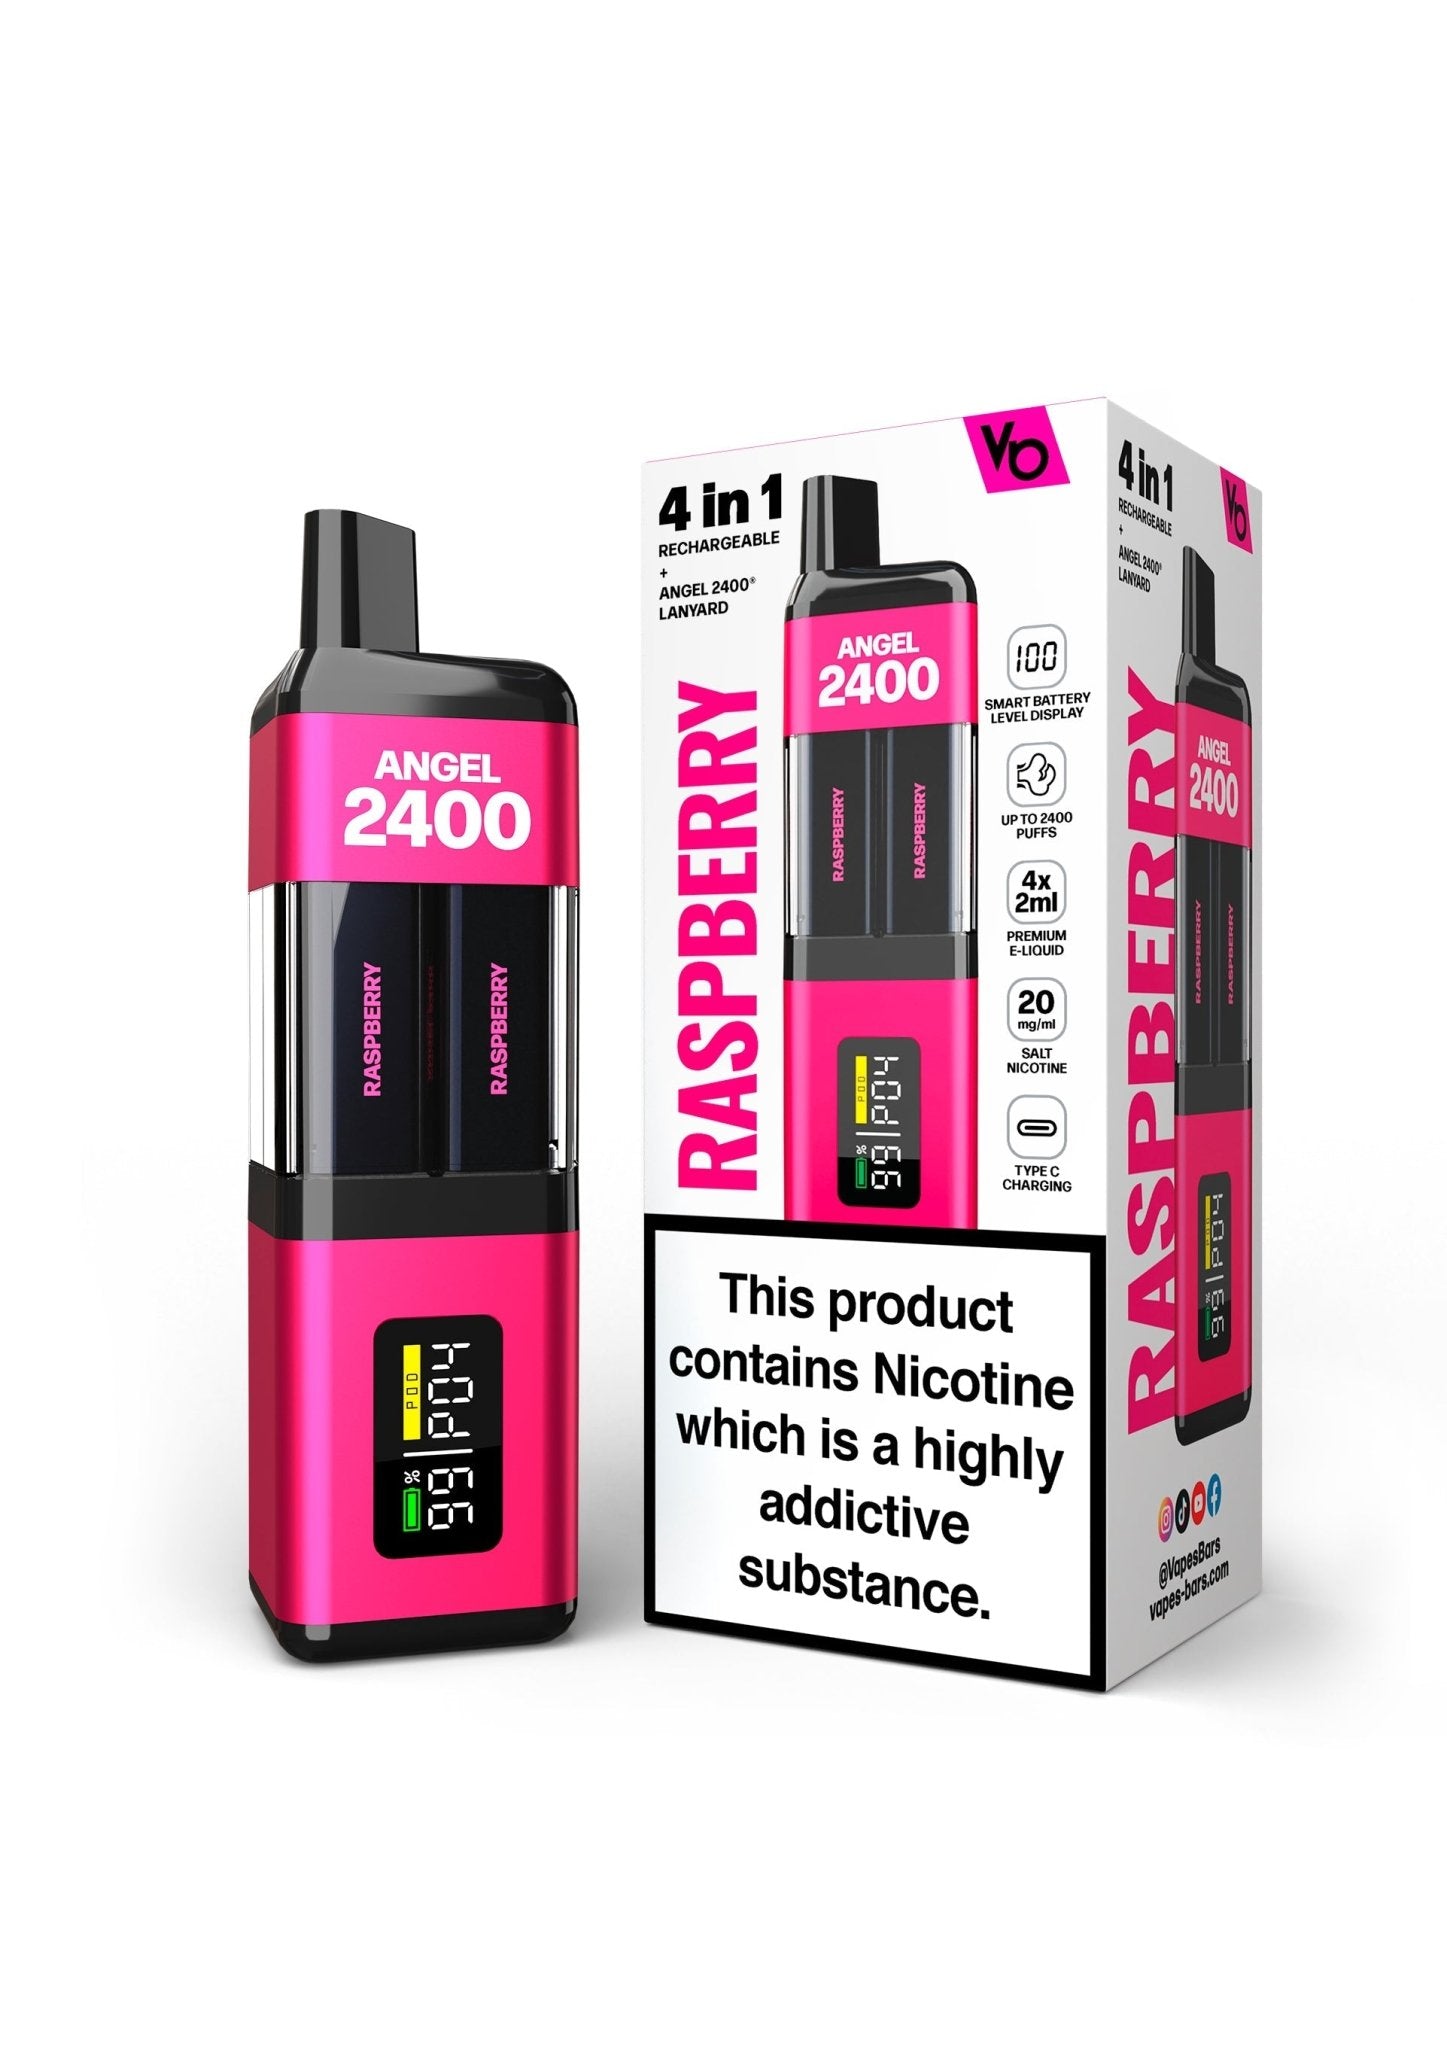 Angel 2400 Puffs Disposble Vape by Vapes Bars (Pack of 5) - Wolfvapes.co.uk-Raspberry